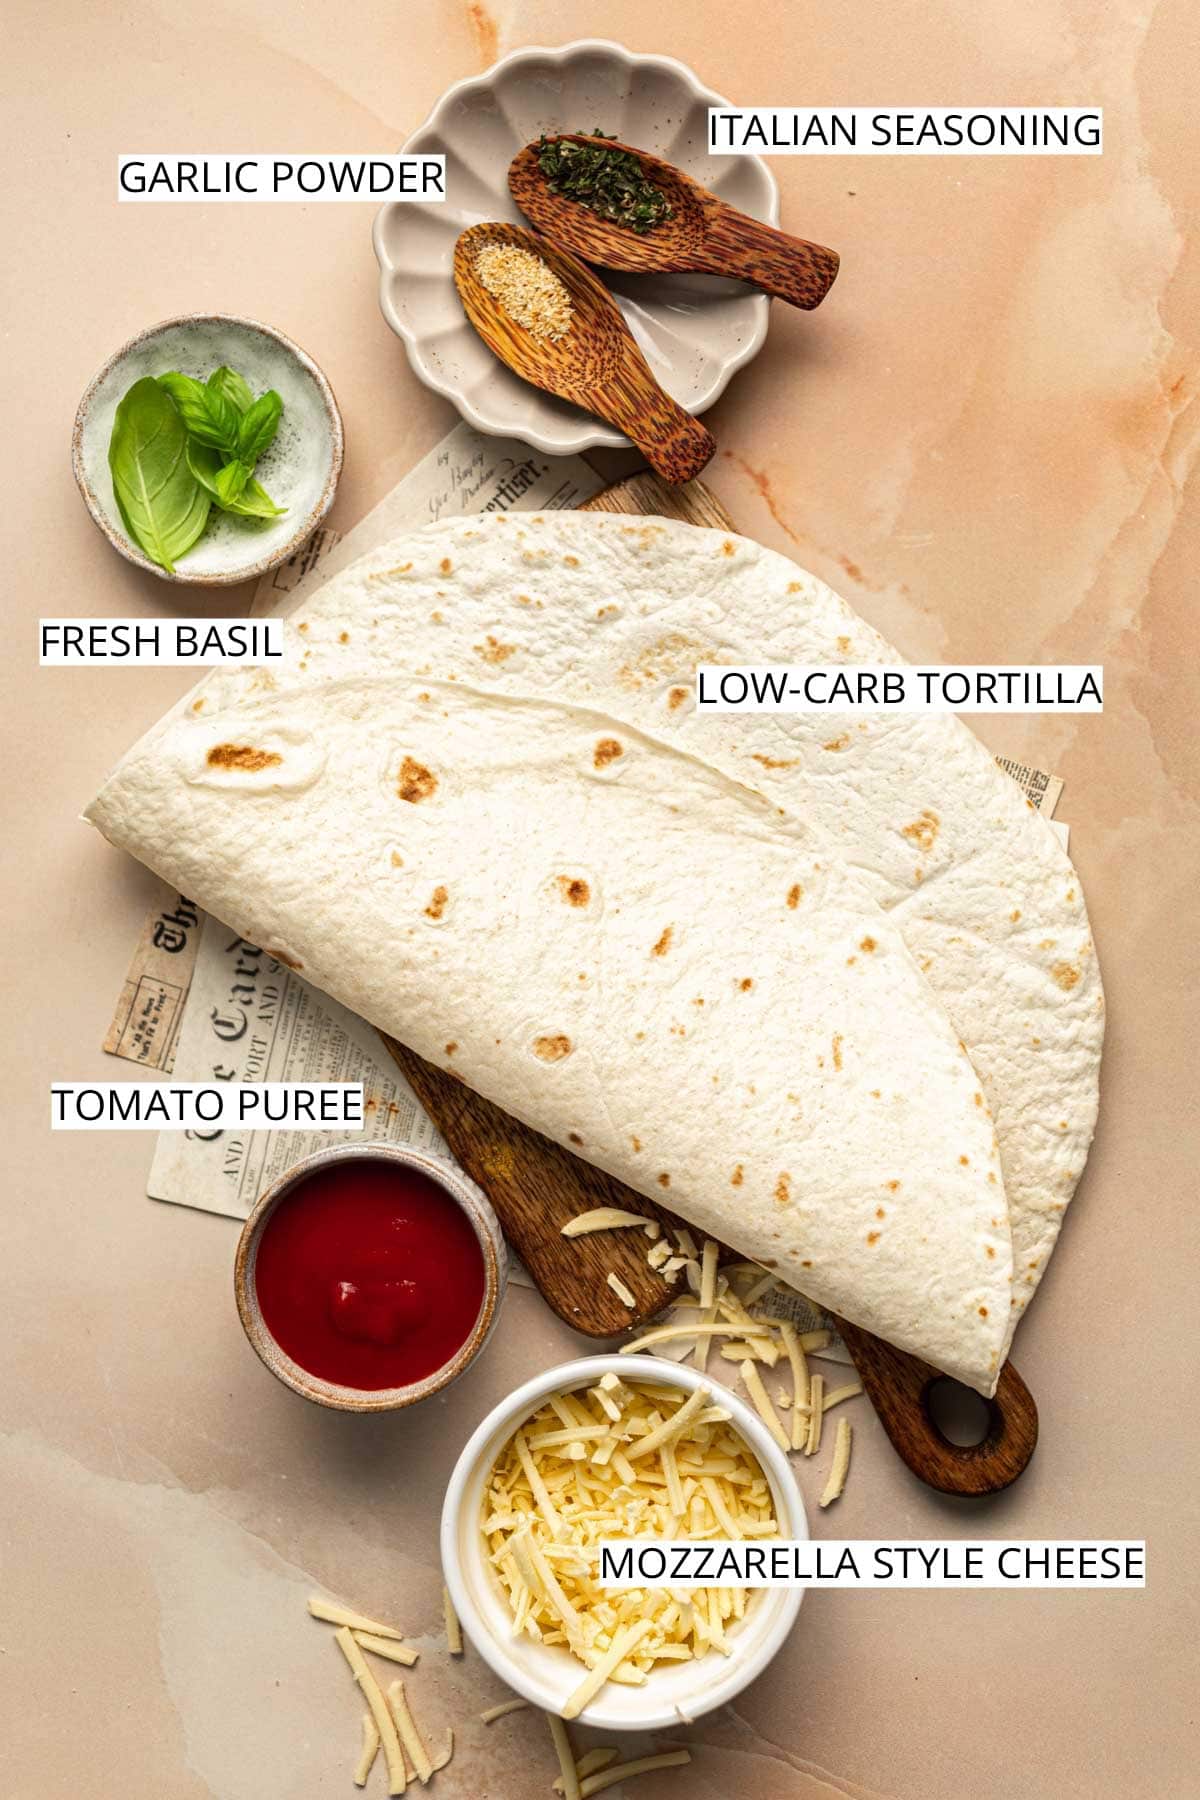 All ingredients to make crispy tortilla pizza laid out on a surface.